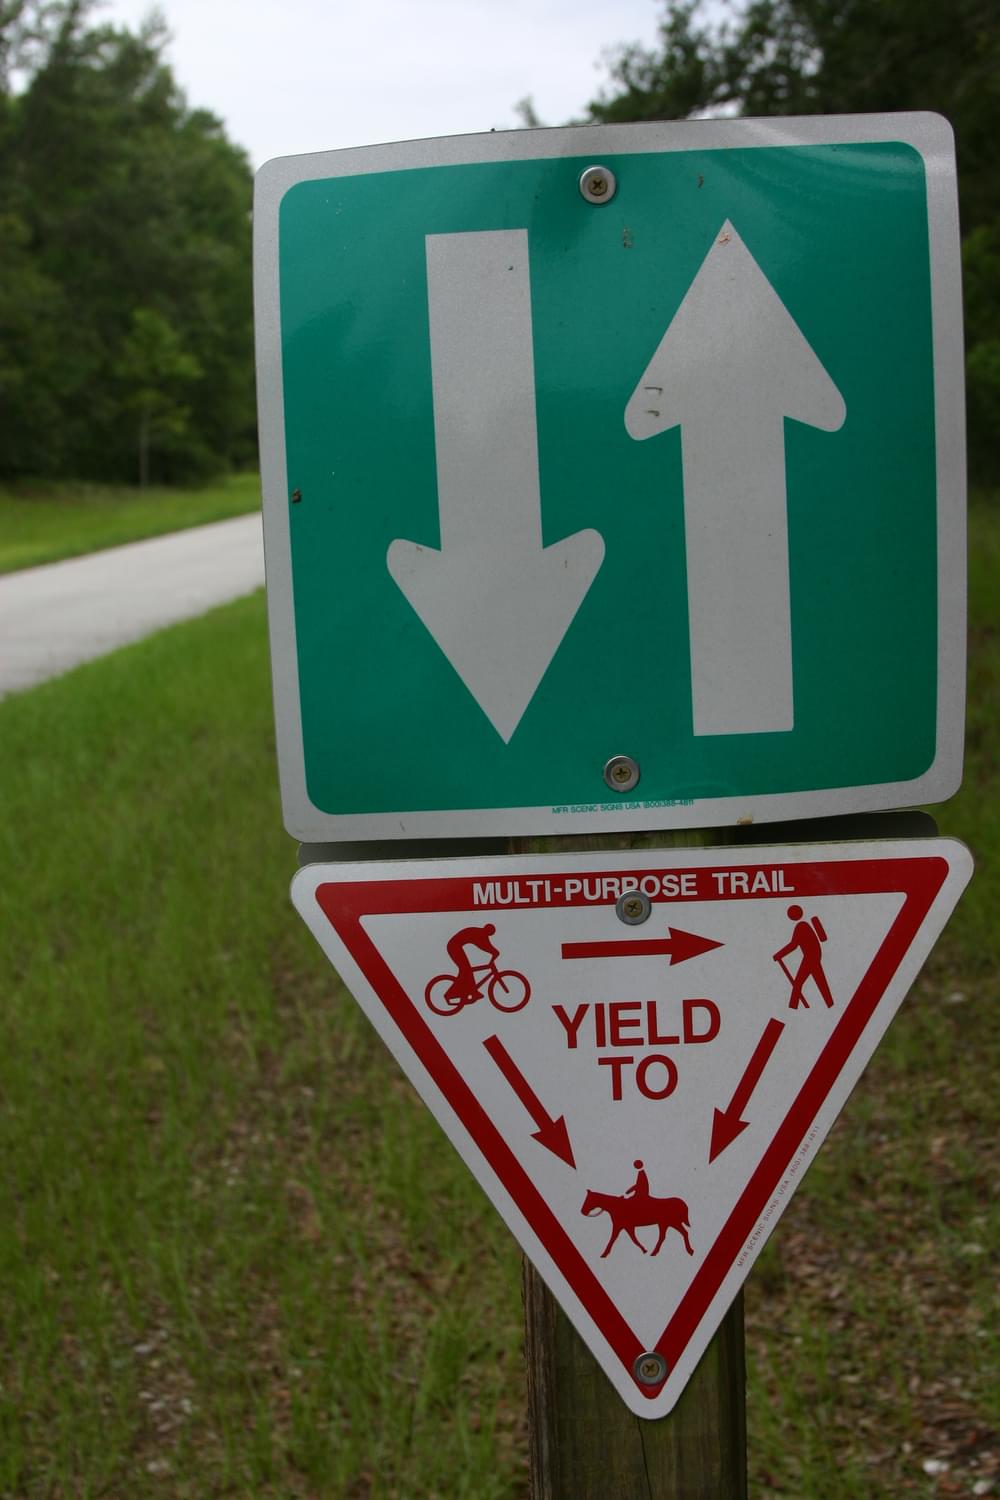 In addition to the yield sign, arrows apparently indicate users are to keep right on the Withlacoochie State Trail, Florida